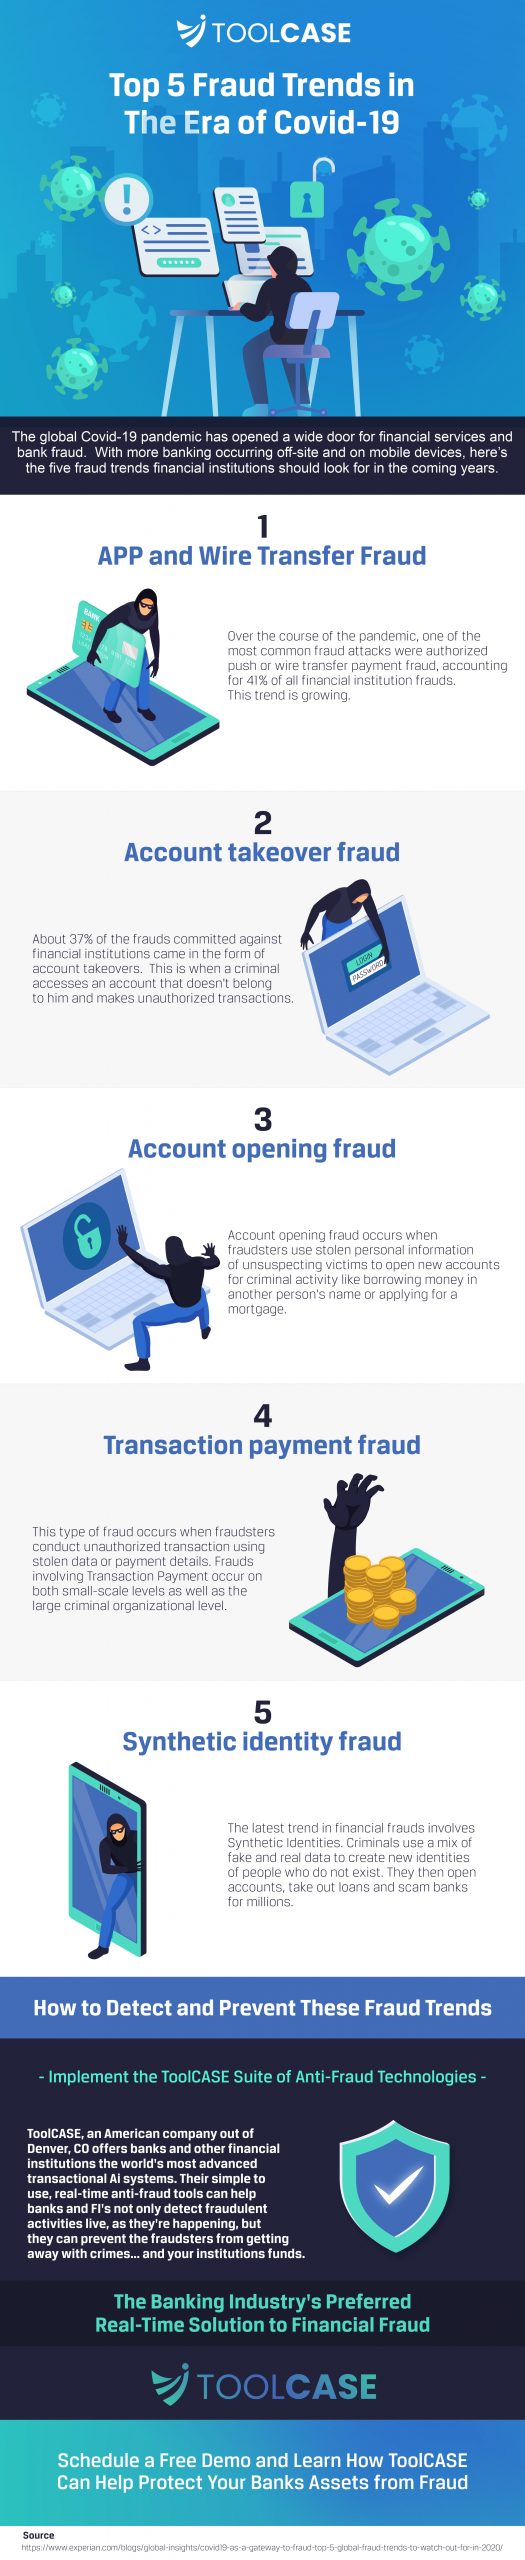 Top 5 Fraud Trends in The Era of Covid-19